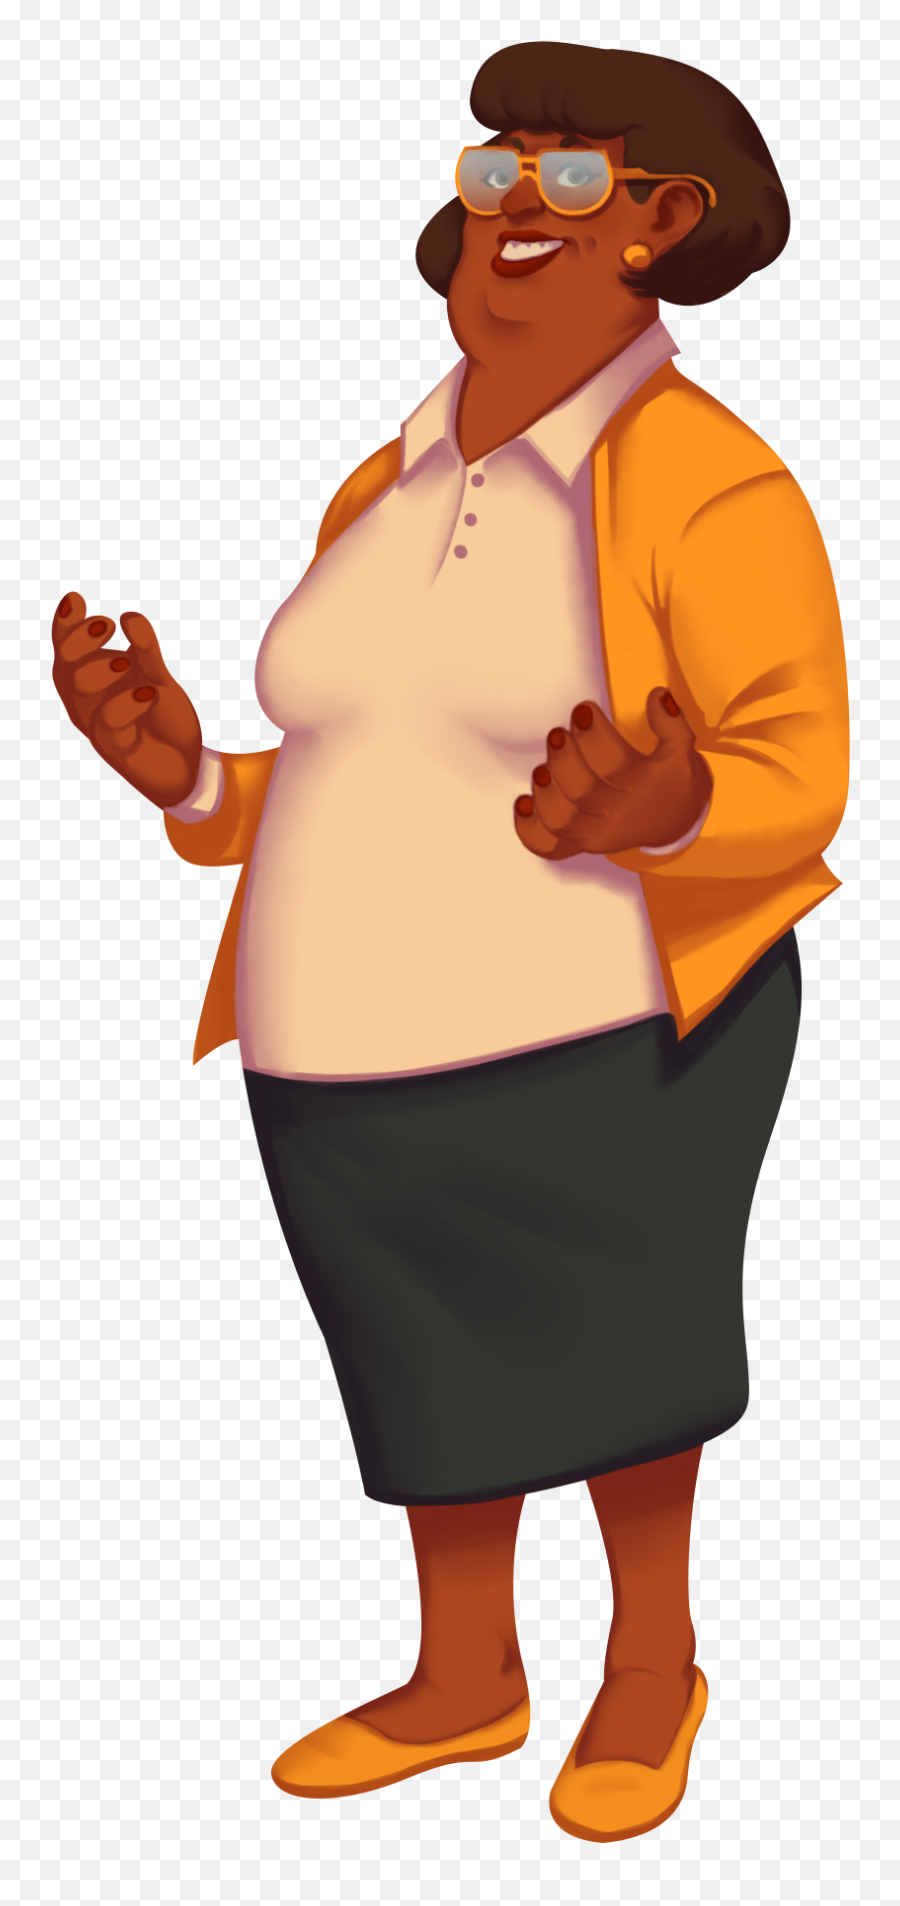 Character Design - Senior Citizen Png,Cartoon Icon Images